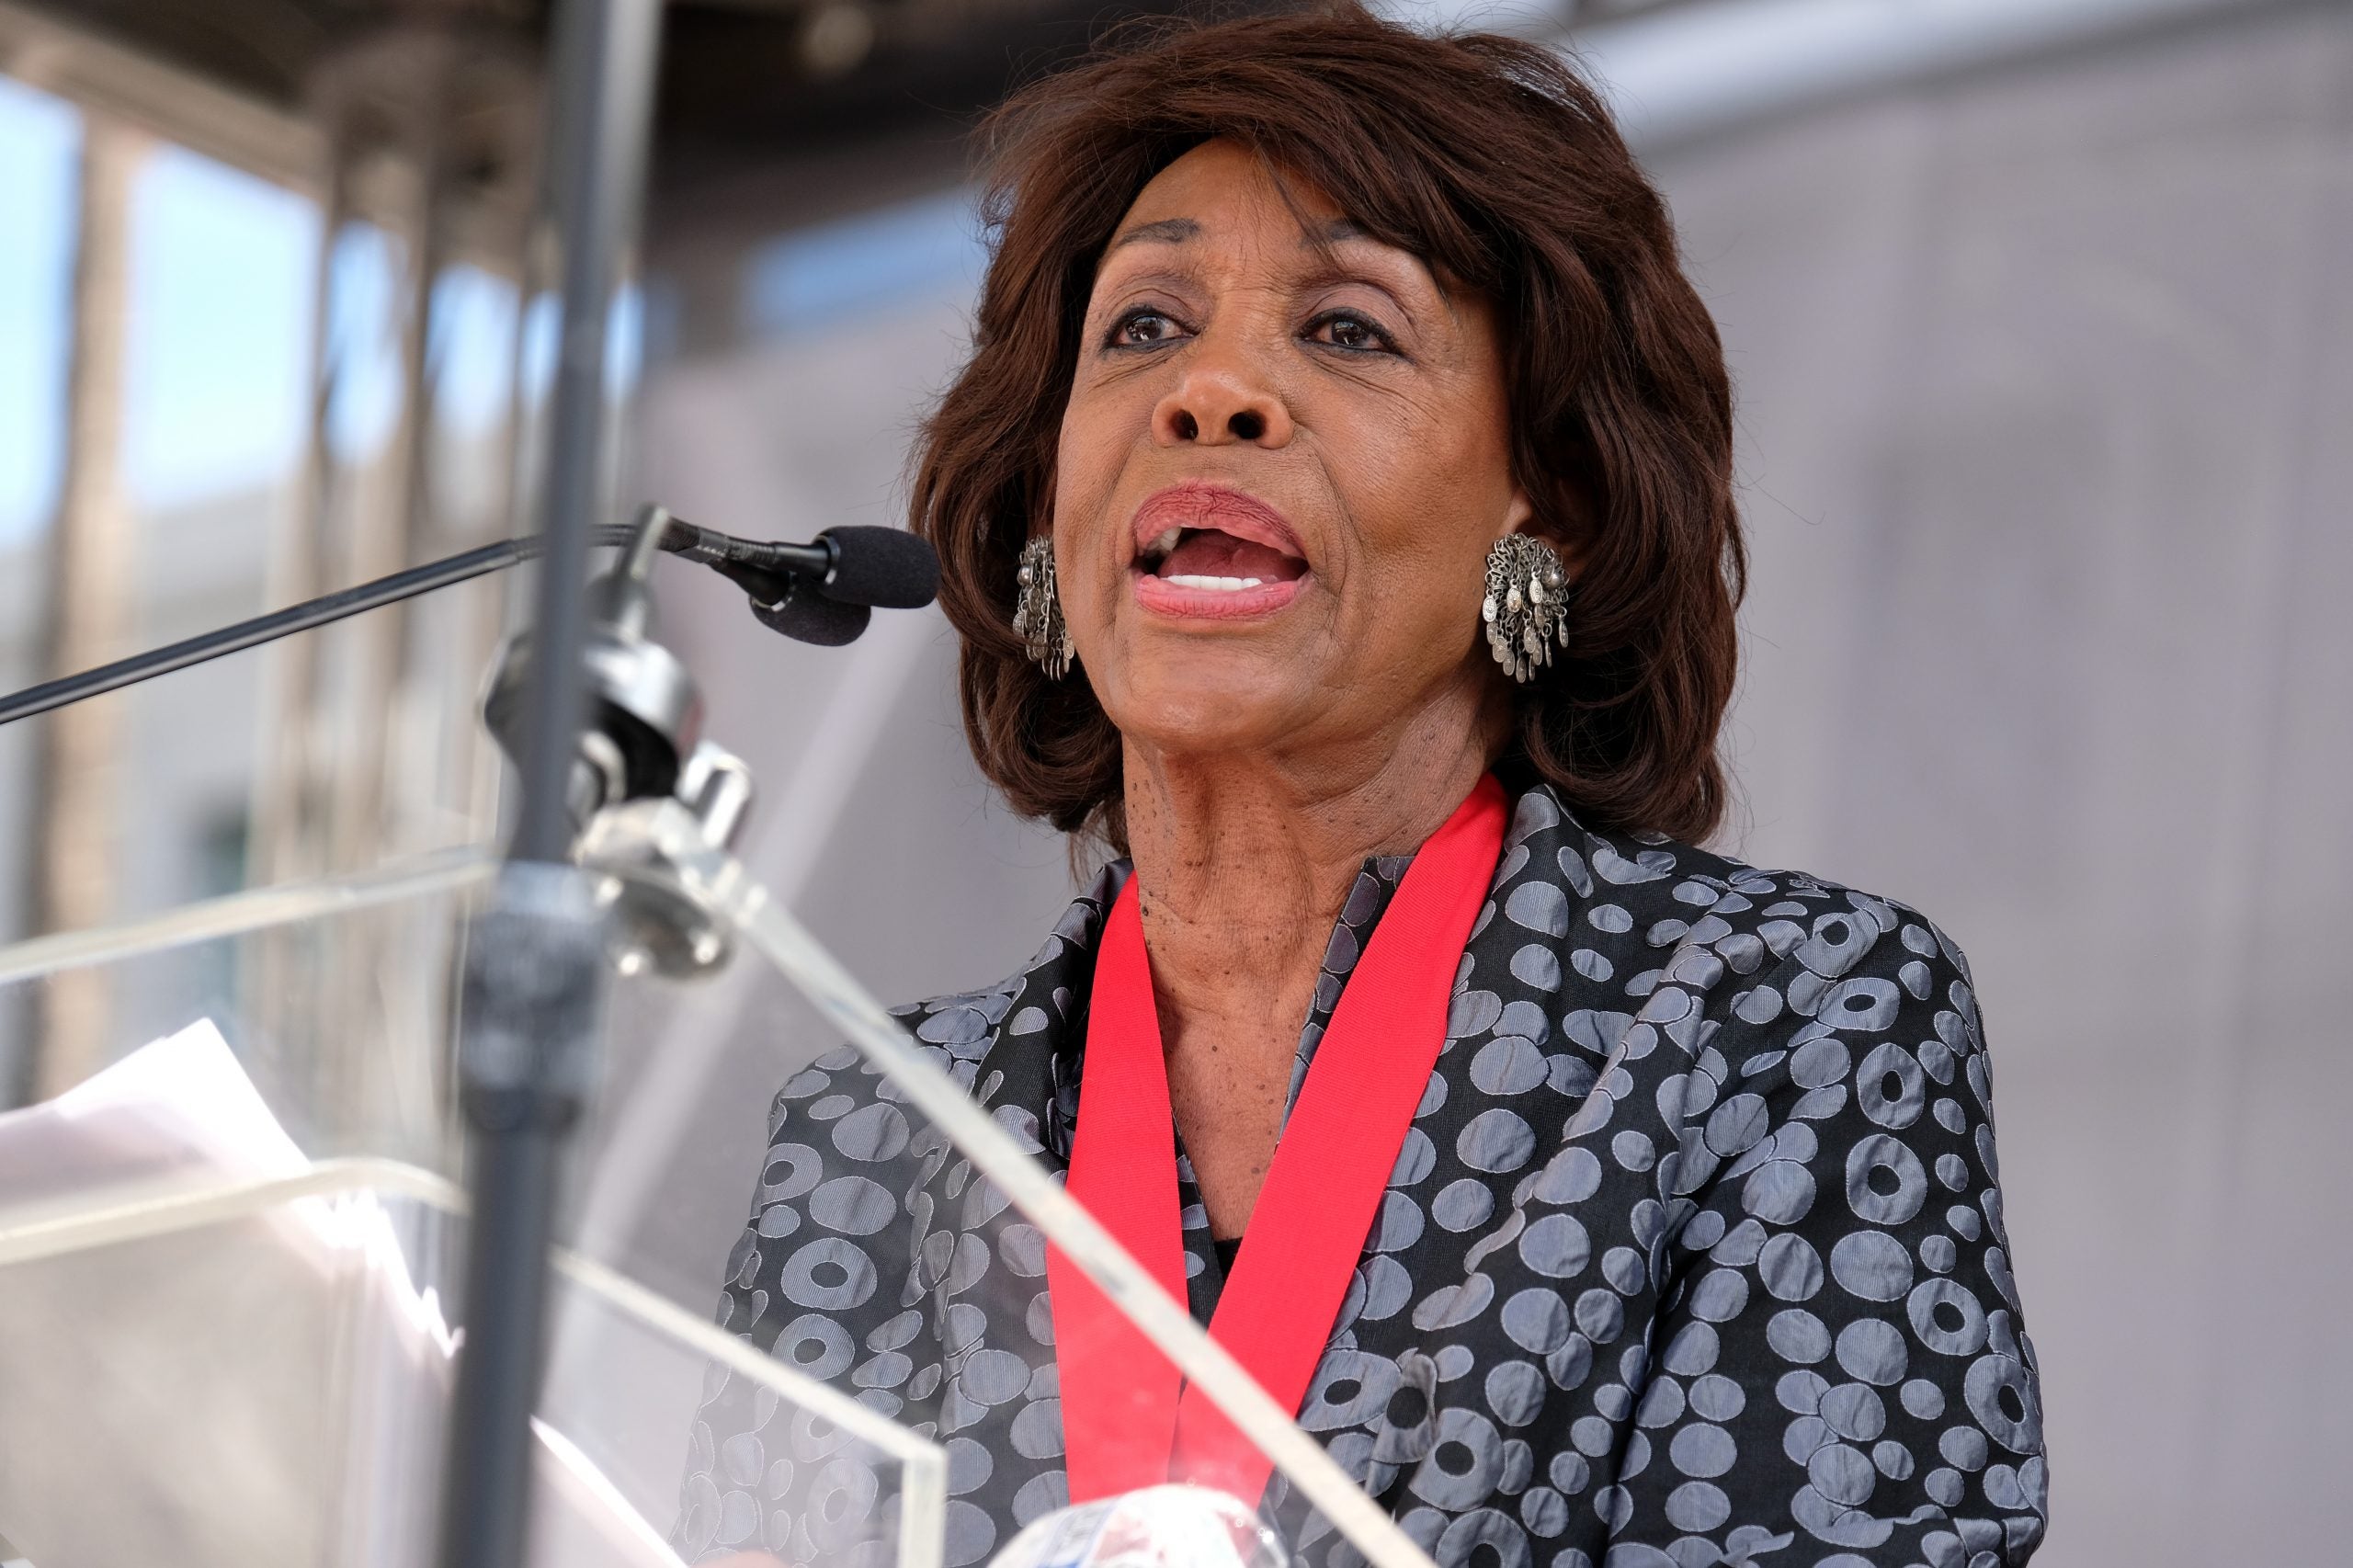 Rep. Maxine Waters On Joe Biden: 'We're Going To Have A Black Woman VP'